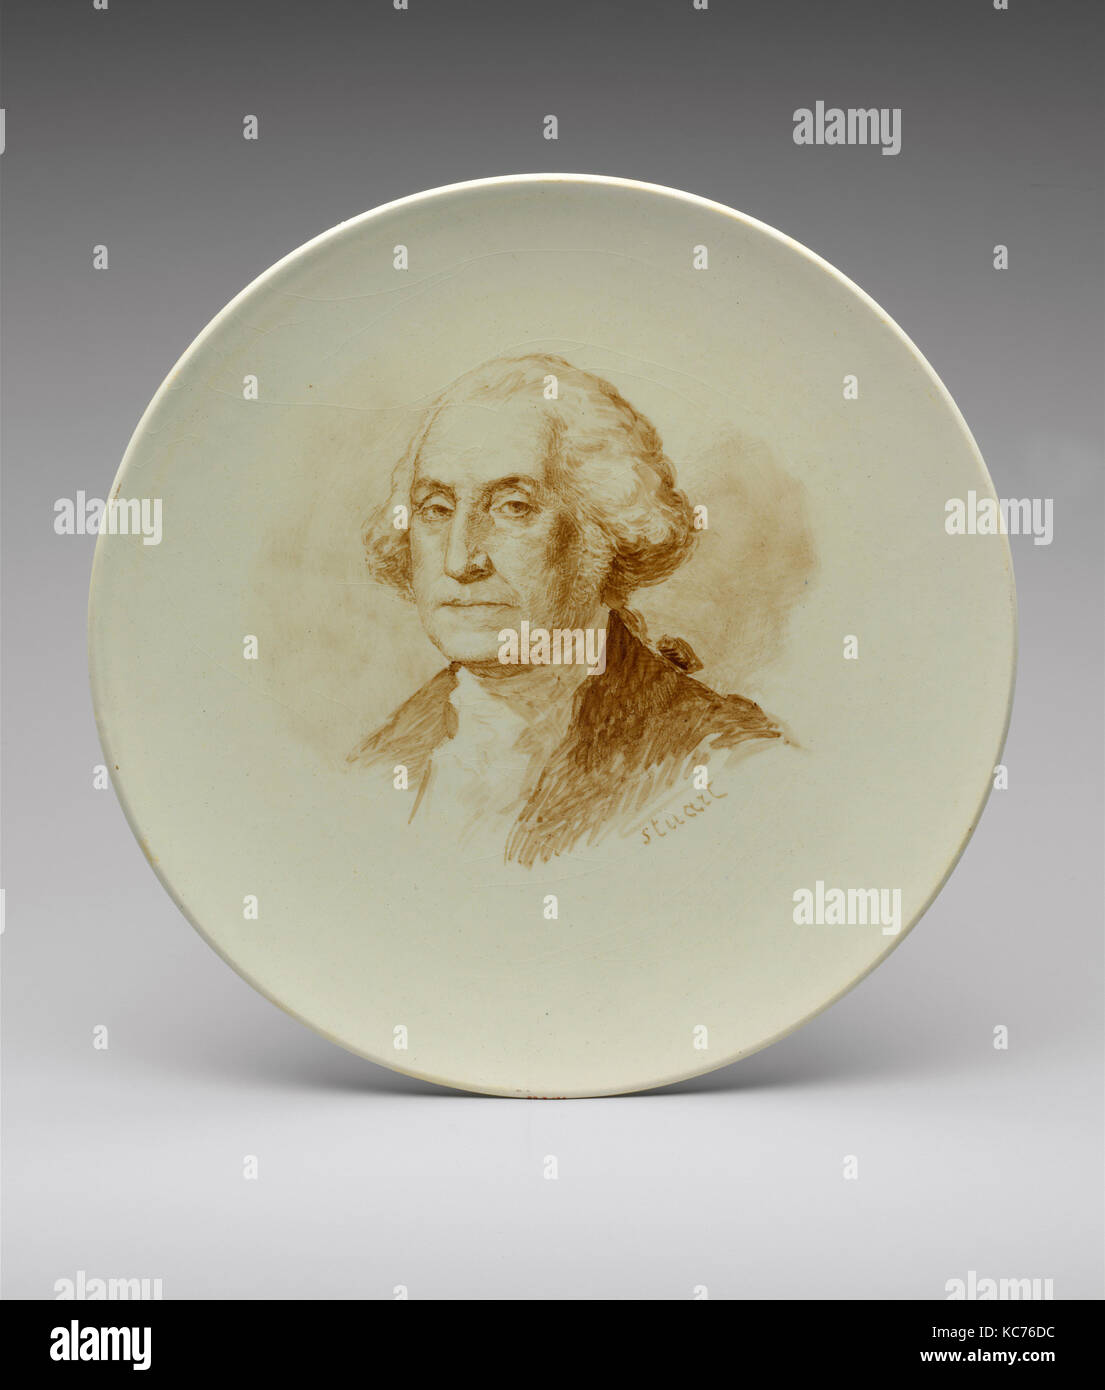 George Washington, 1840–83, Made in France, French, Faience, Diam. 8 3/4 in. (22.2 cm), Ceramics, After Gilbert Stuart (American Stock Photo